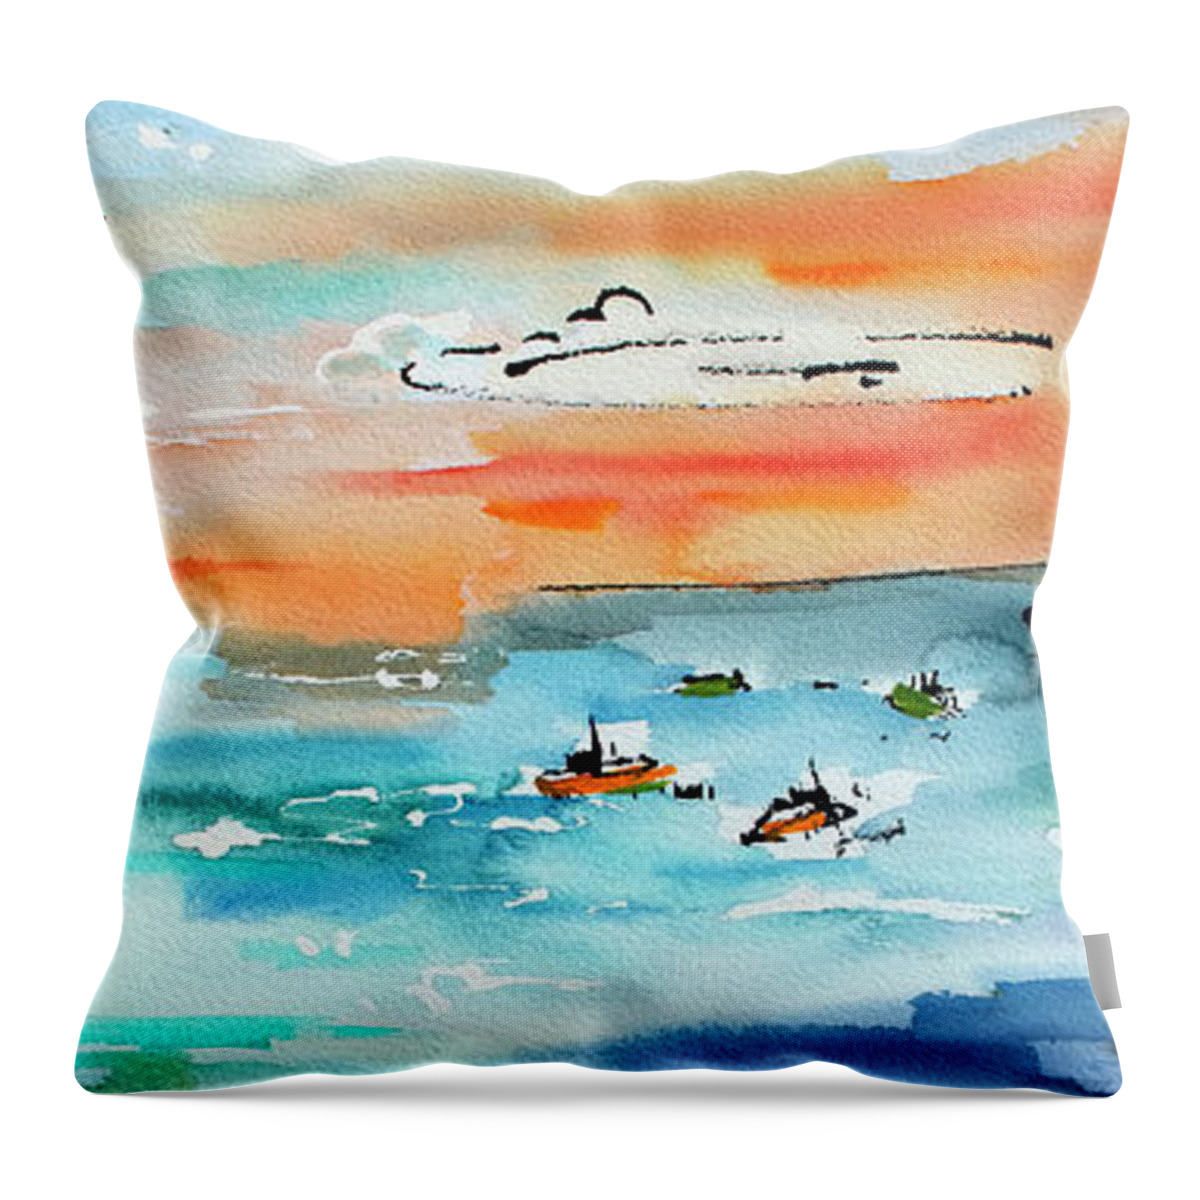 Amalfi Throw Pillow featuring the painting Modern Amalfi Coast Small Cove Panorama by Ginette Callaway